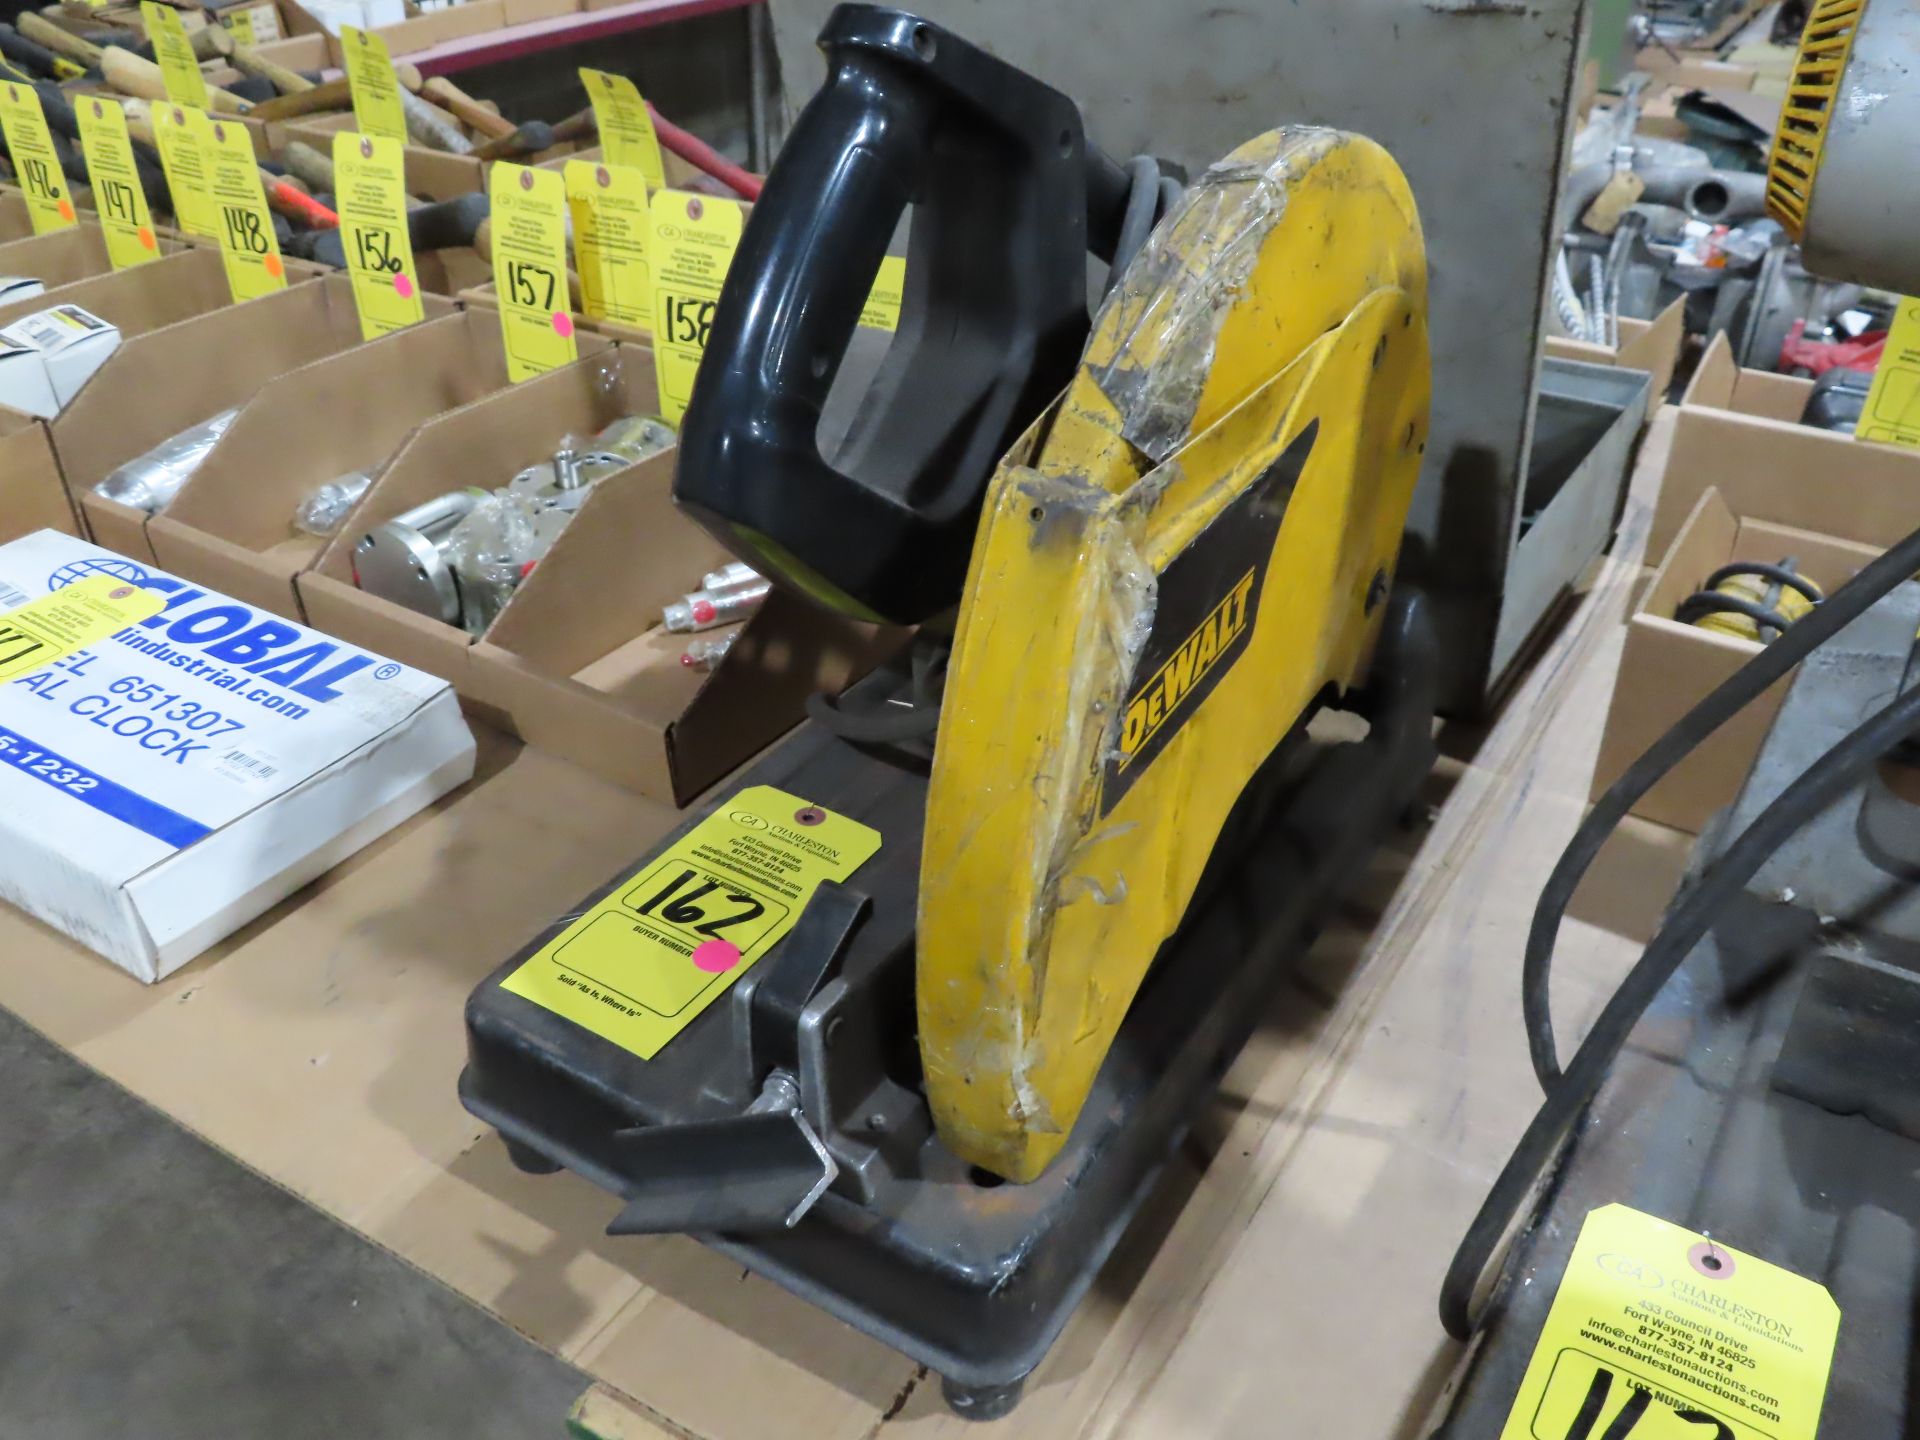 Dewalt abrasive saw, used, as always with Brolyn LLC auctions, all lots can be picked up from